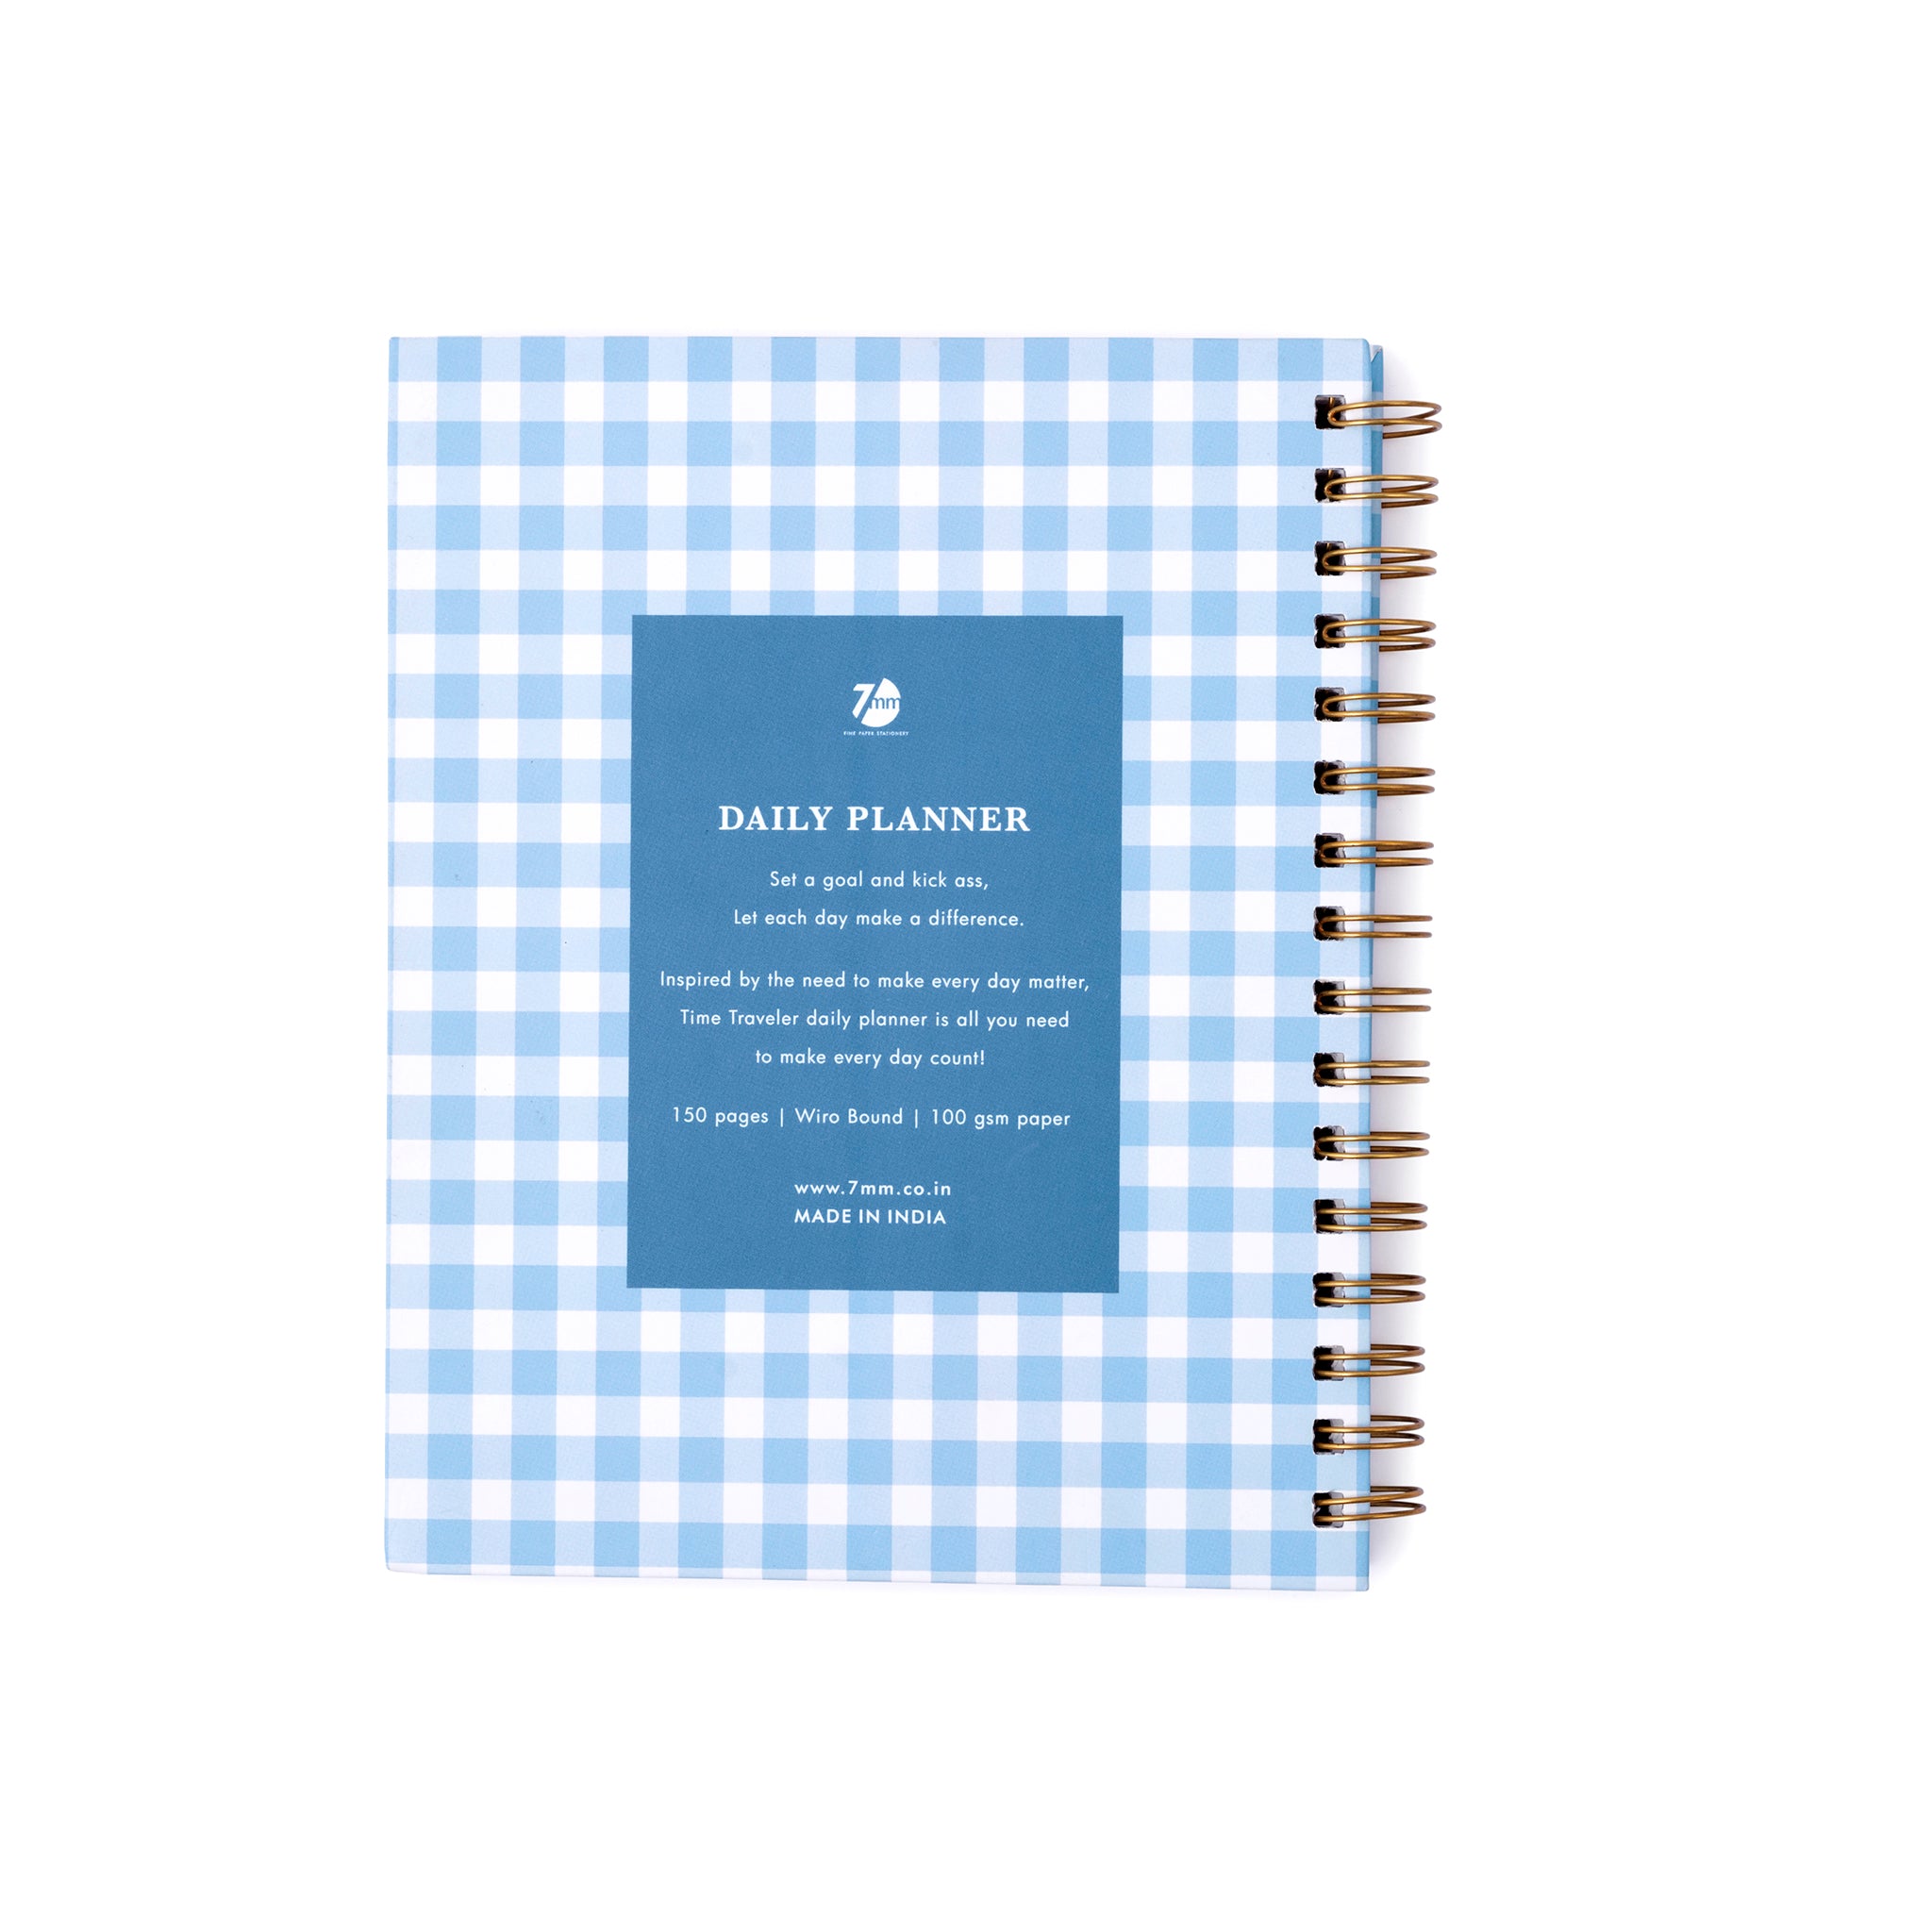 7mm Fine Paper Stationery - Daily Planner (Square) – 7mm - Fine Paper  Stationery